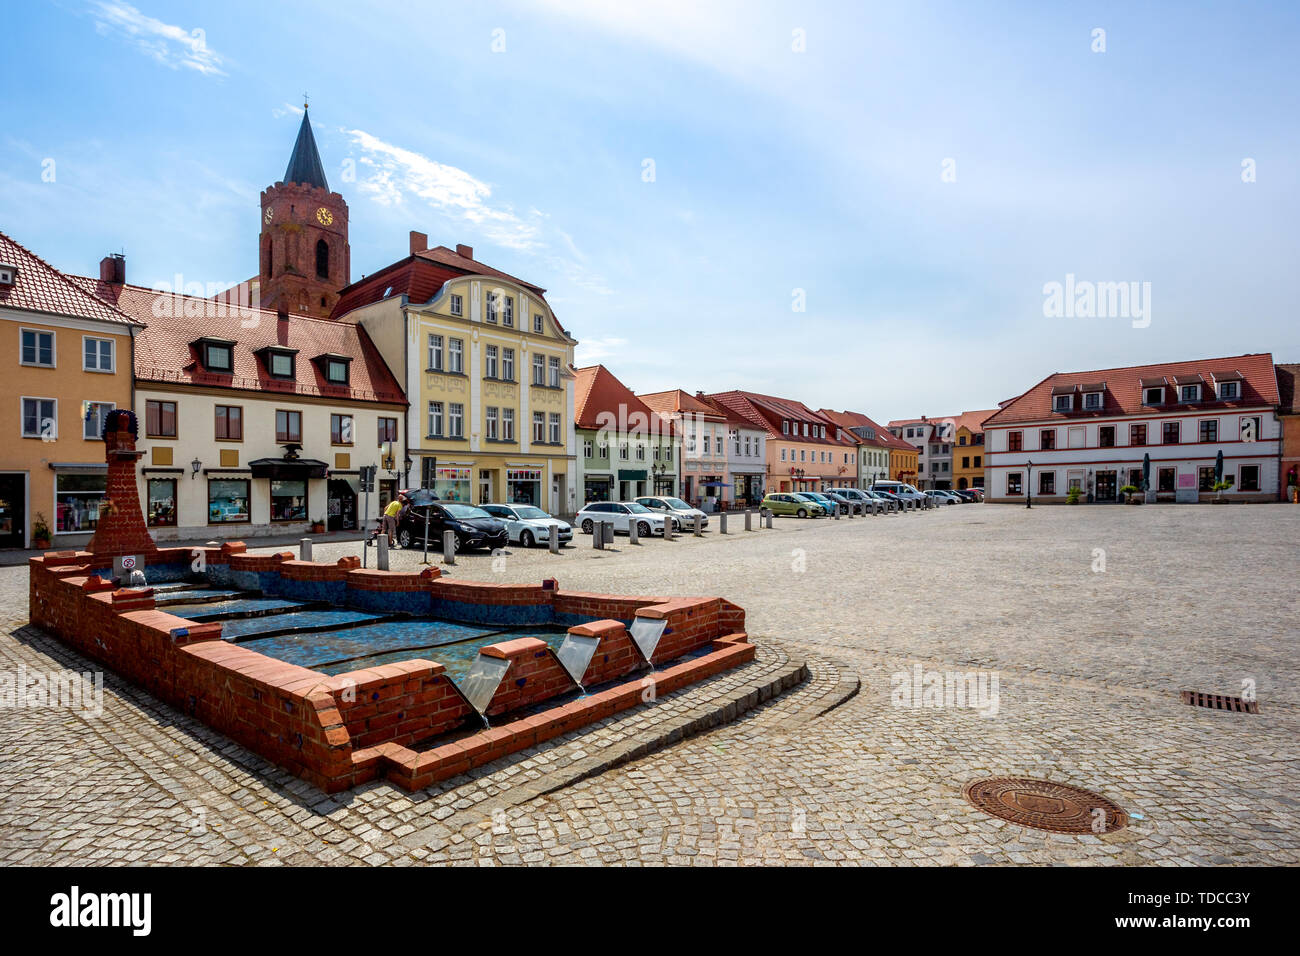 Market of Beeskow in Germany Stock Photo